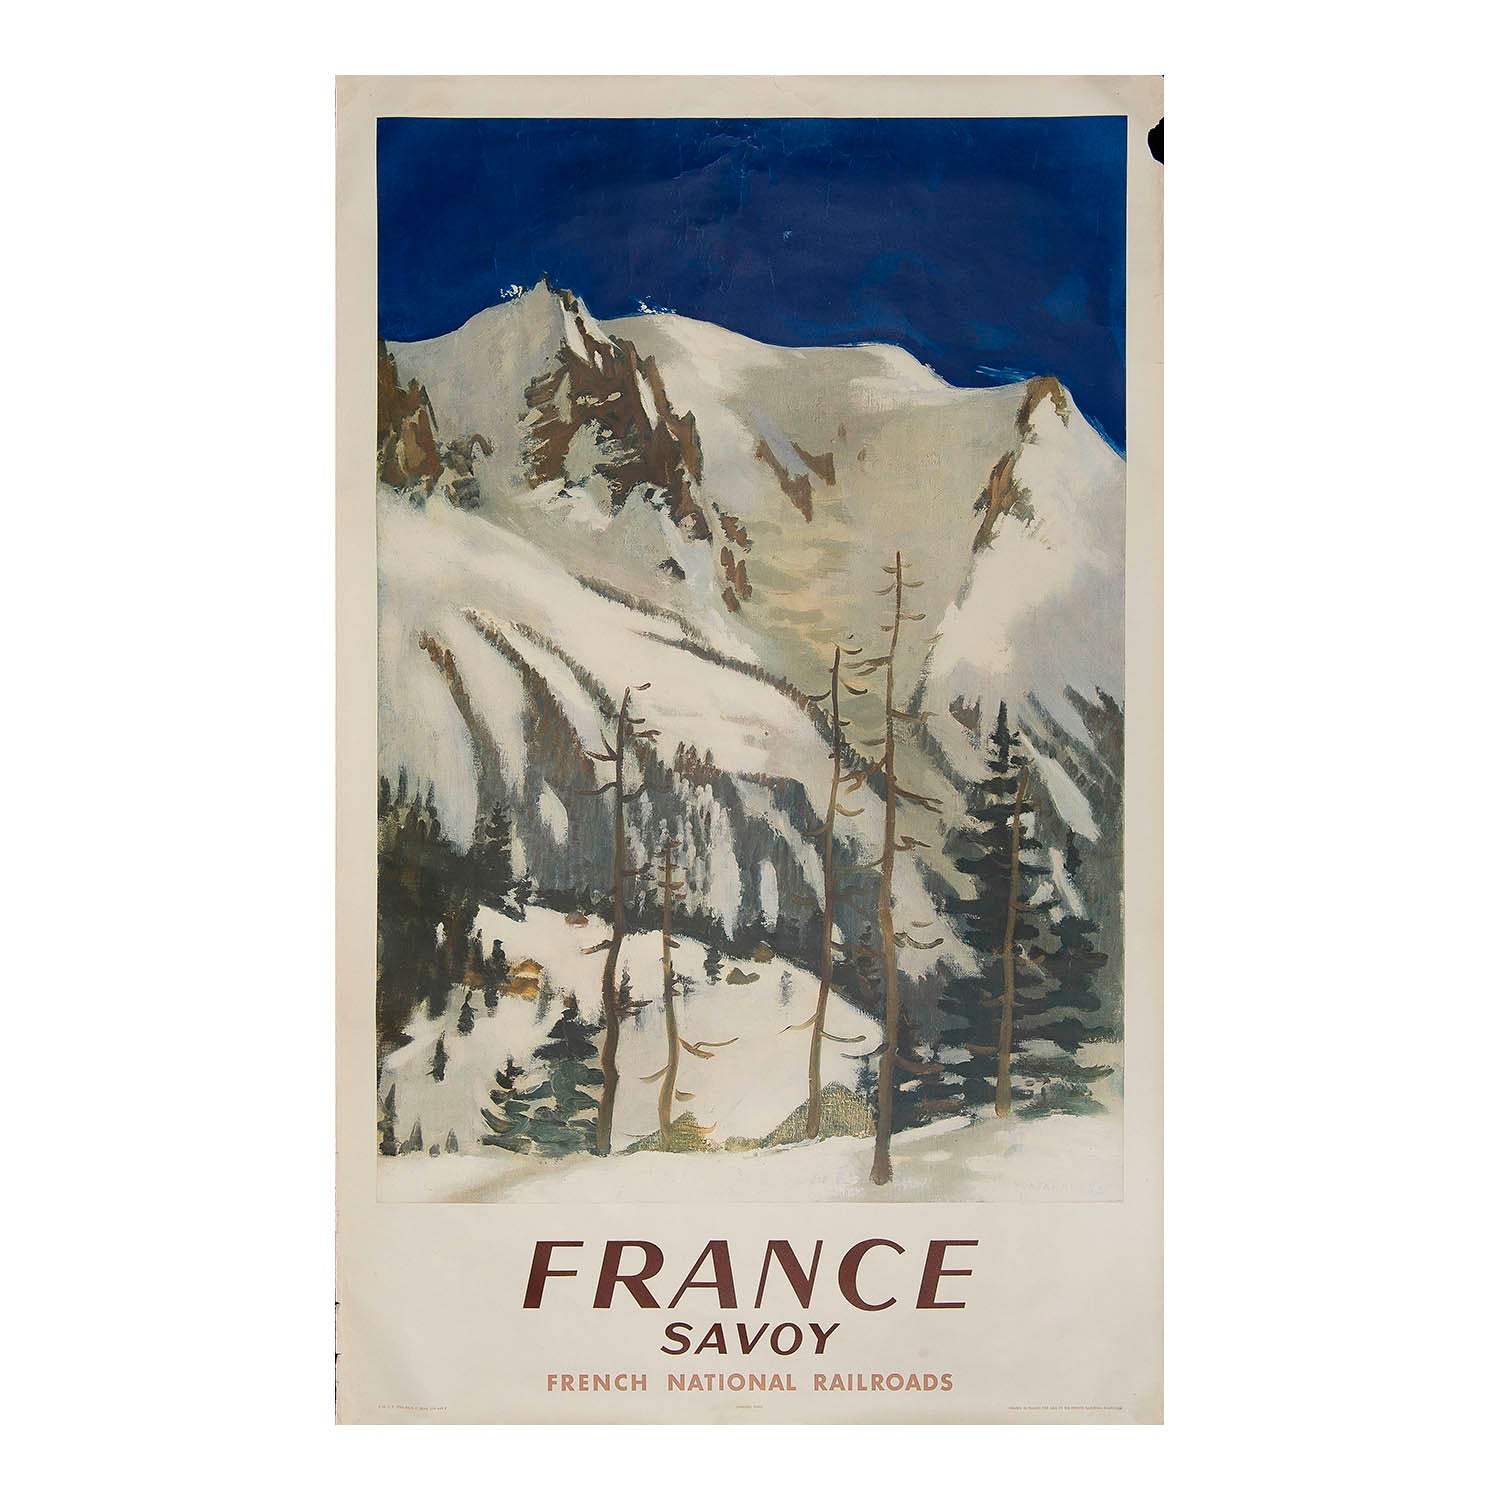 French Railways’ poster for the alpine region of Savoy (Savoie), designed by Lucien Fontanarosa and published in 1952.